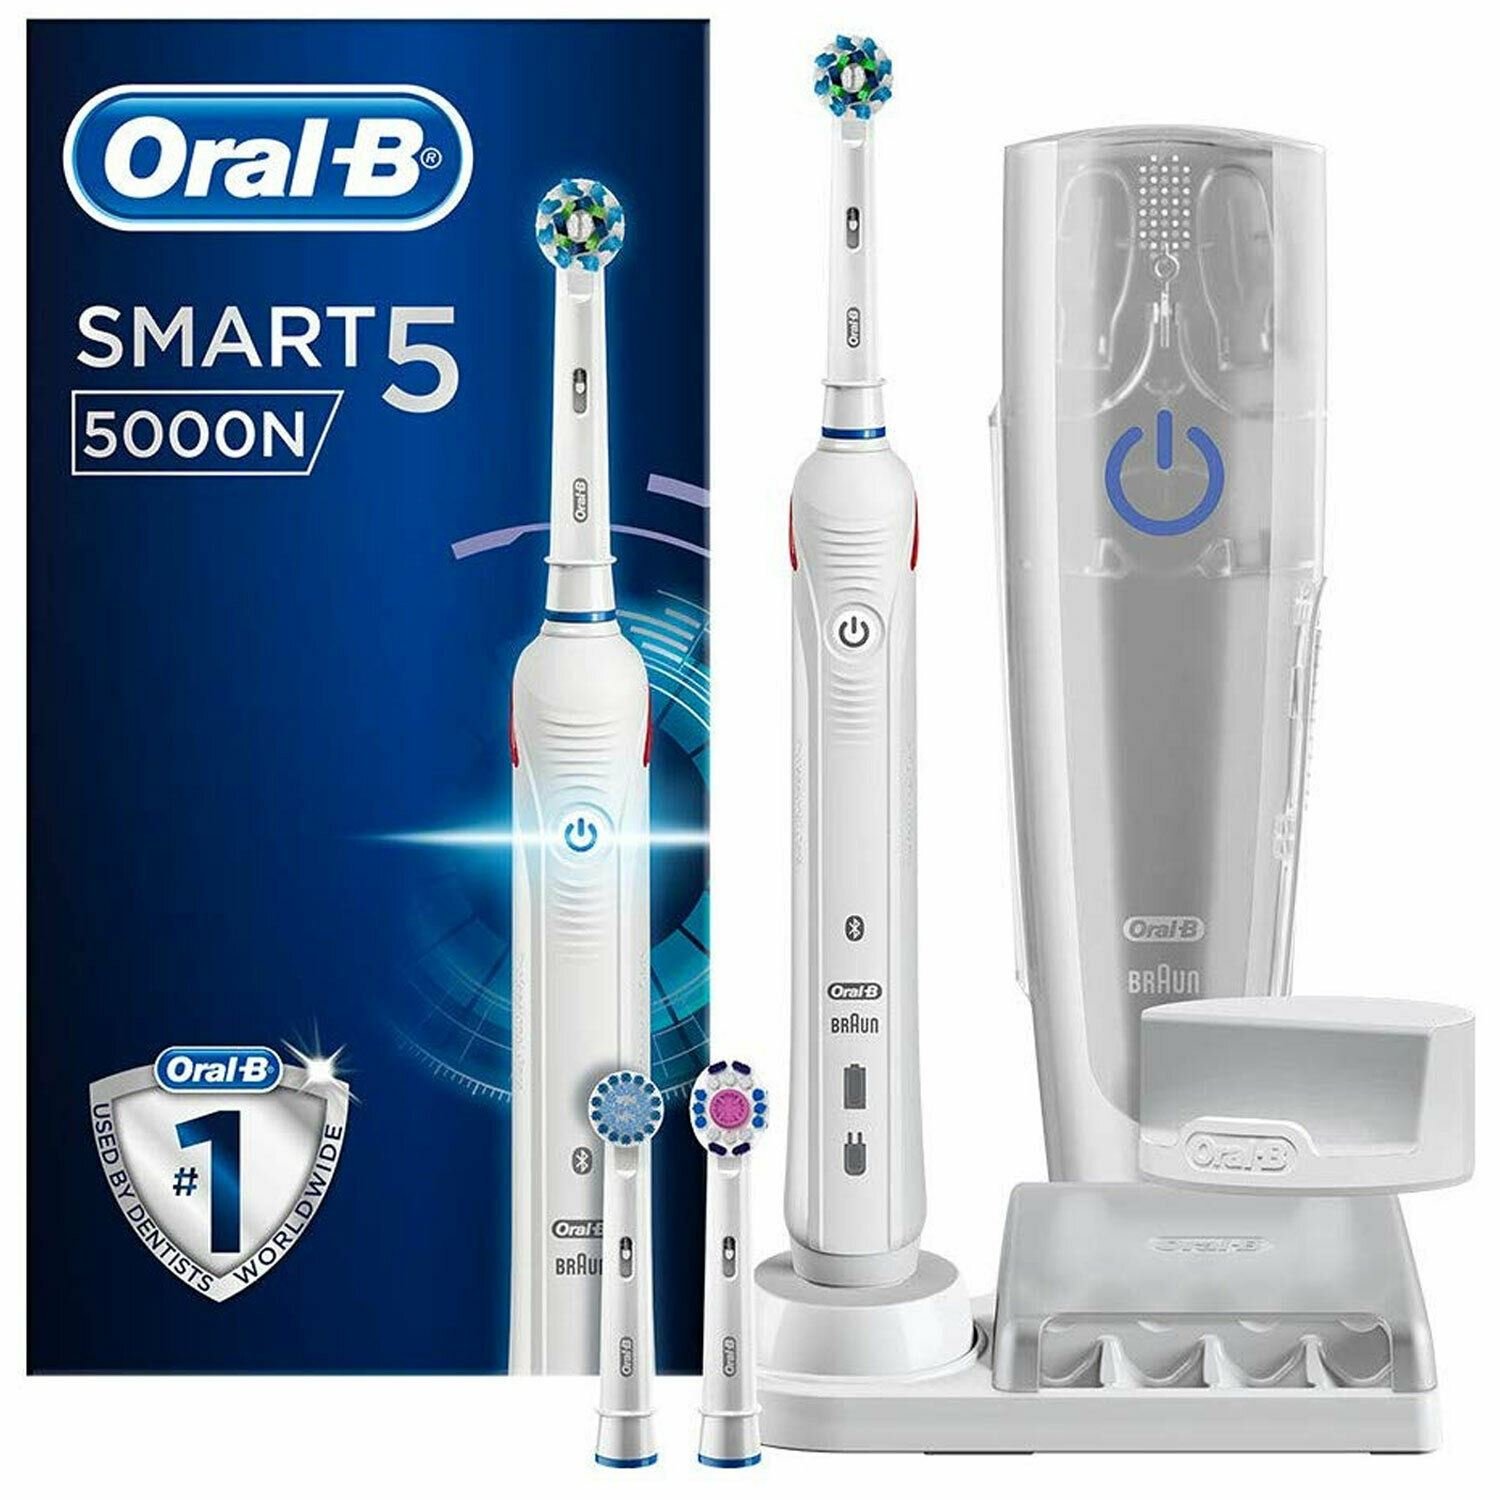 Oral-B Smart 5 5000N Cross Action Electric Toothbrush White